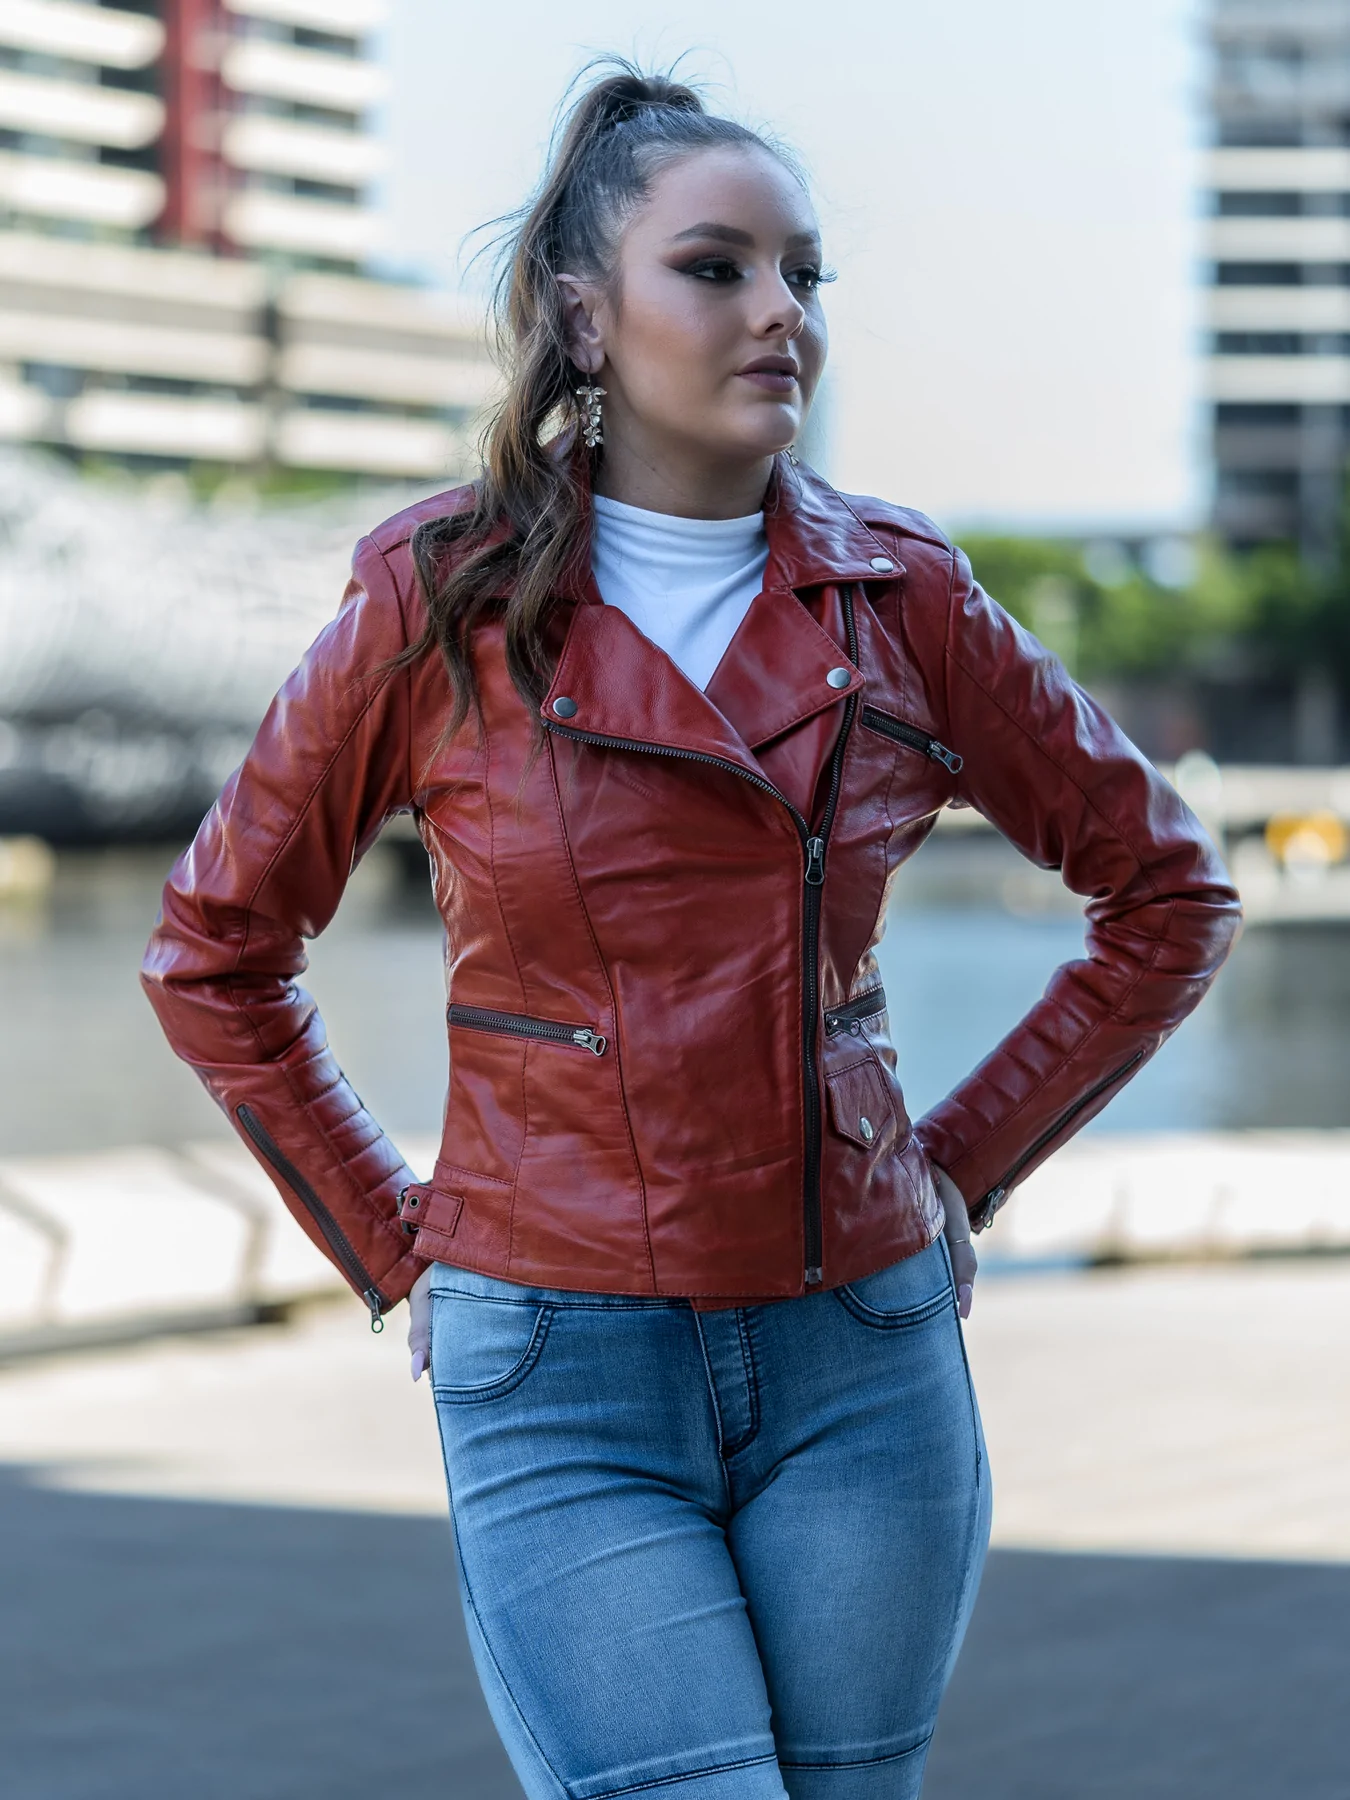 The front zip up look of wine red leather jacket